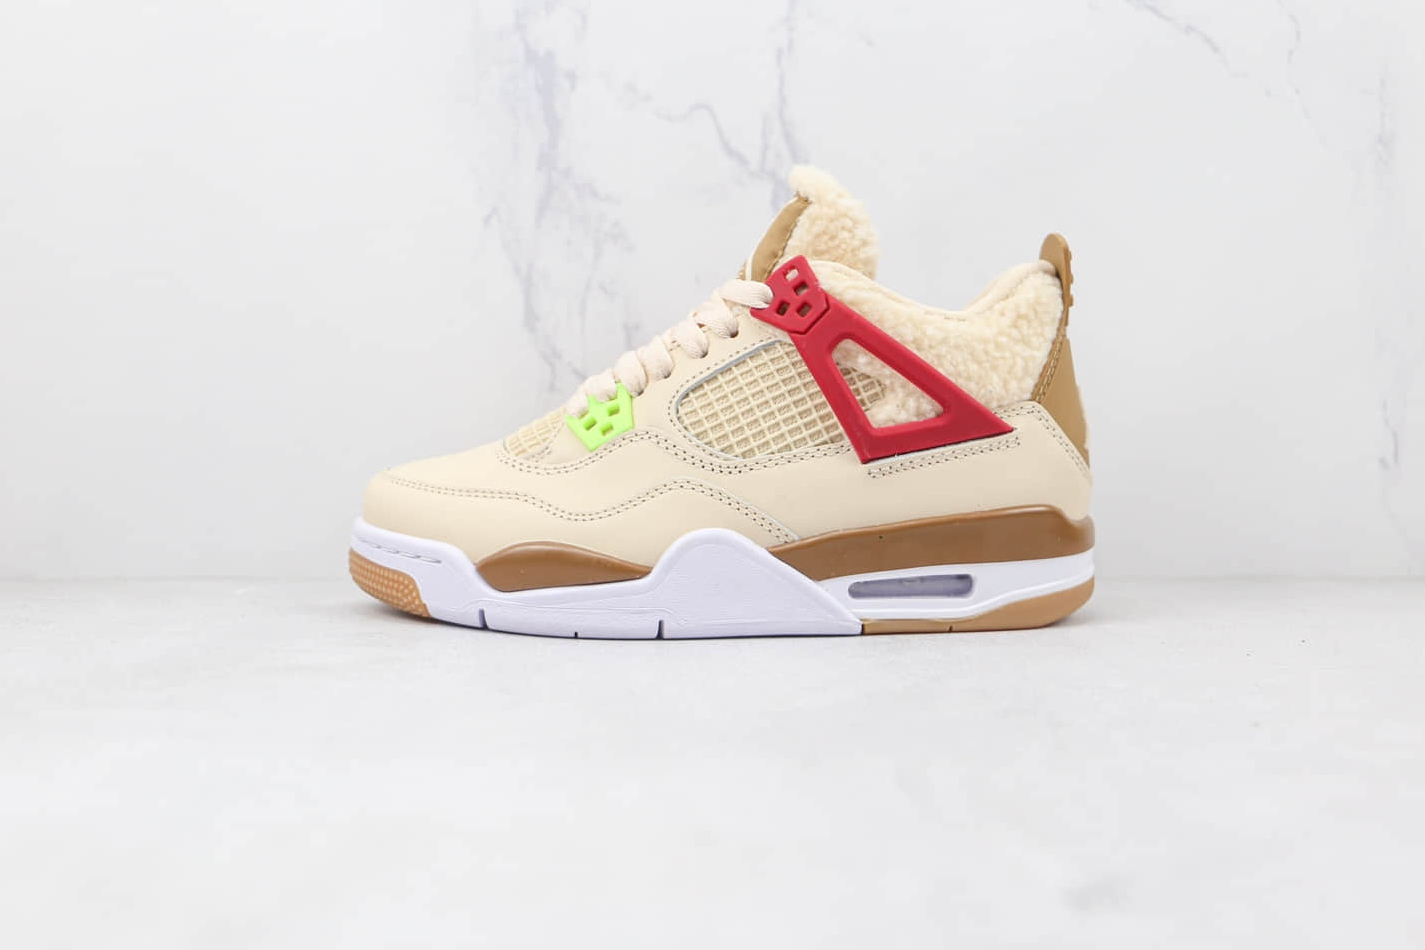 Air Jordan 4 Retro 'Wild Things' DH0572-264 - Premium Sneakers with a Bold, Eye-Catching Design